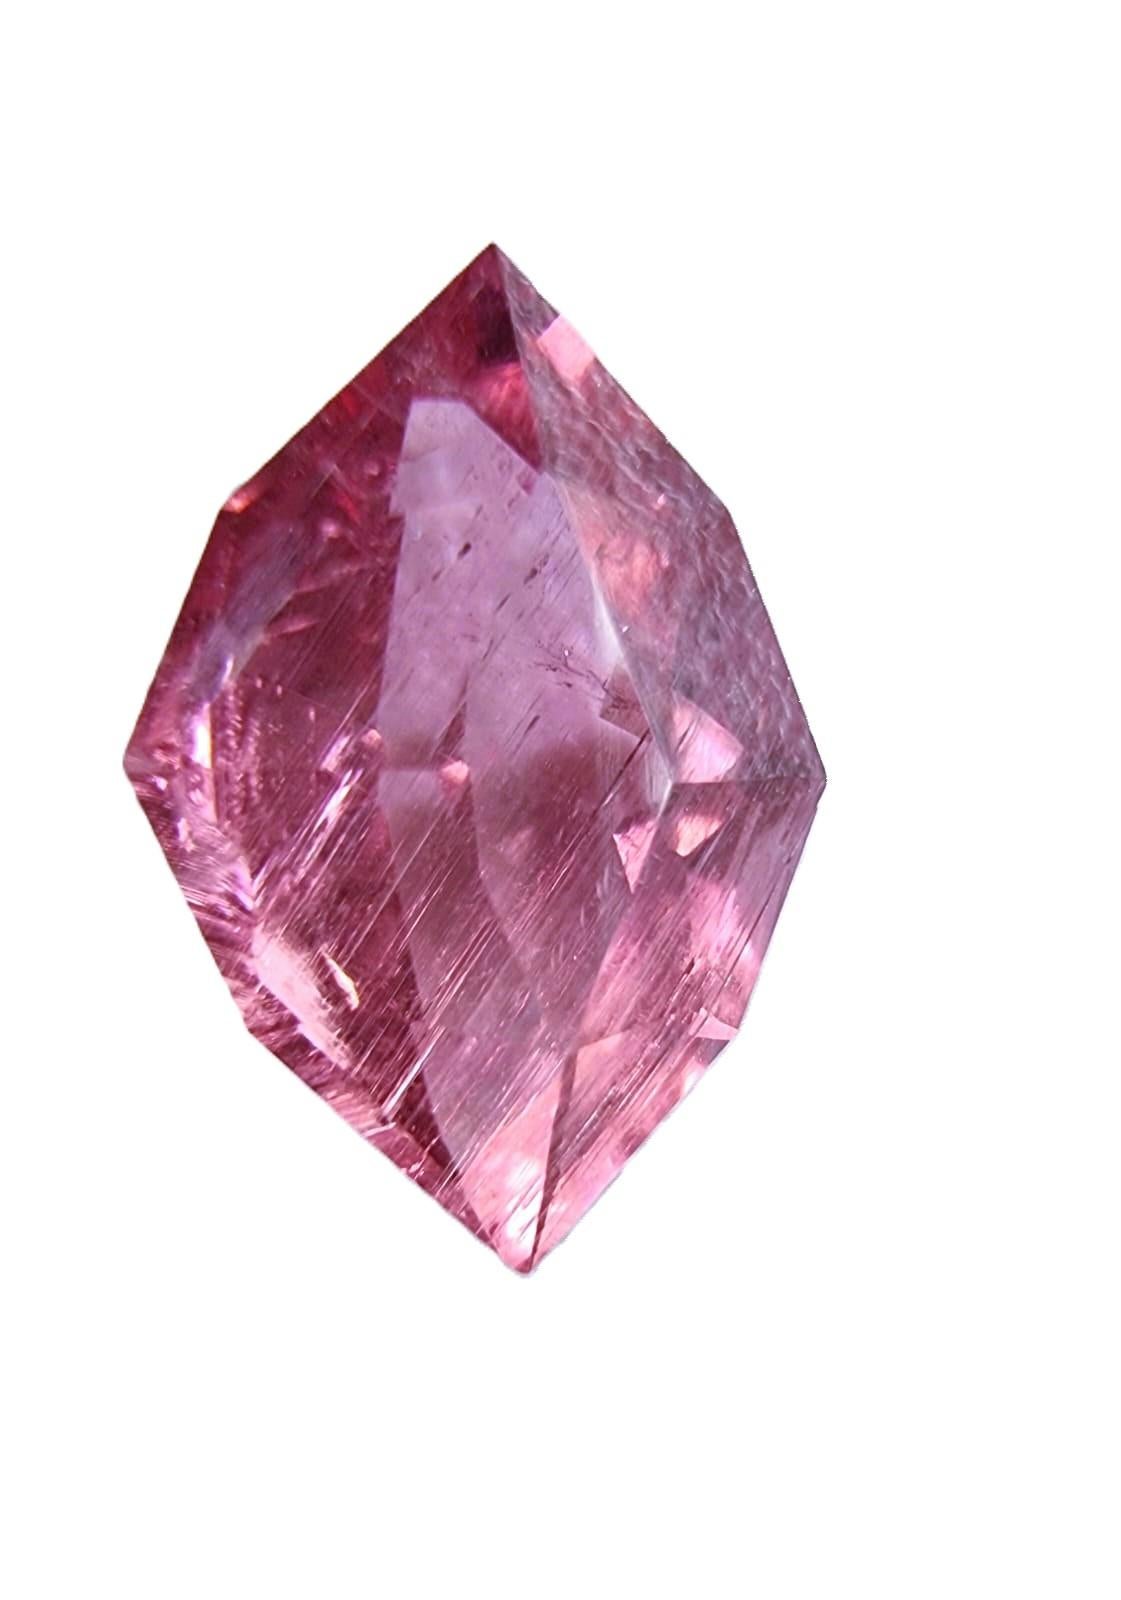 Experience the extraordinary with this 3.89-carat Marquise Cut Rust Reddish Pink Tourmaline Loose Gemstone. 

Gemstone Details:
Carat Weight: 3.89 carats
Shape: Marquise Cut
Variety: Reddish Pink Rust Tourmaline
Y
Measurements:
Length: Approximately